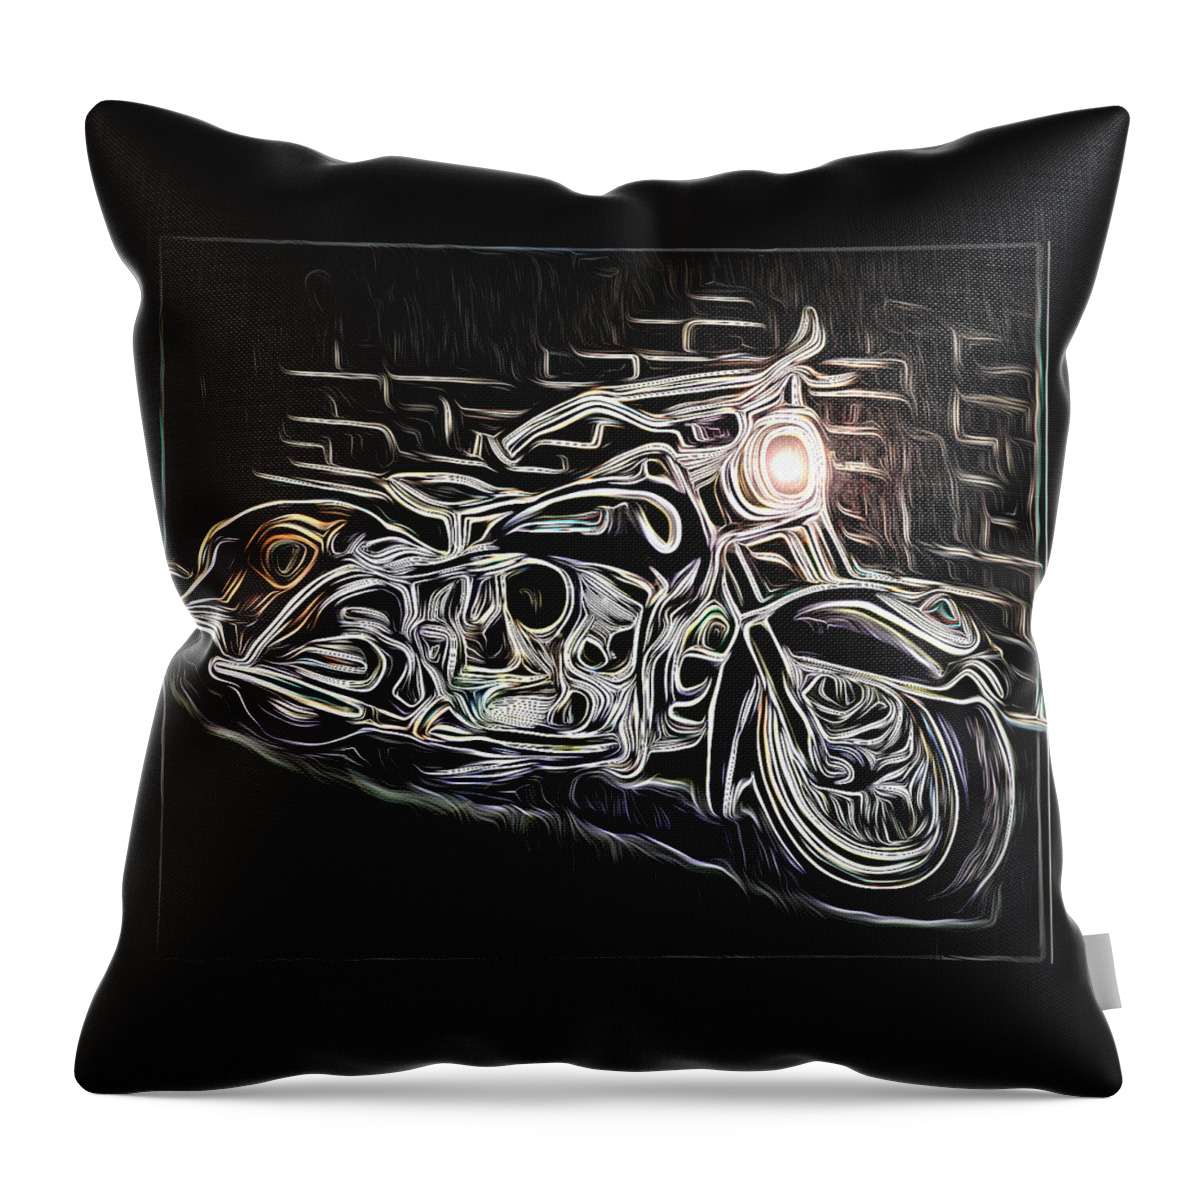 Vintage Motorcycle Throw Pillow featuring the digital art Night Biker by Ronald Mills